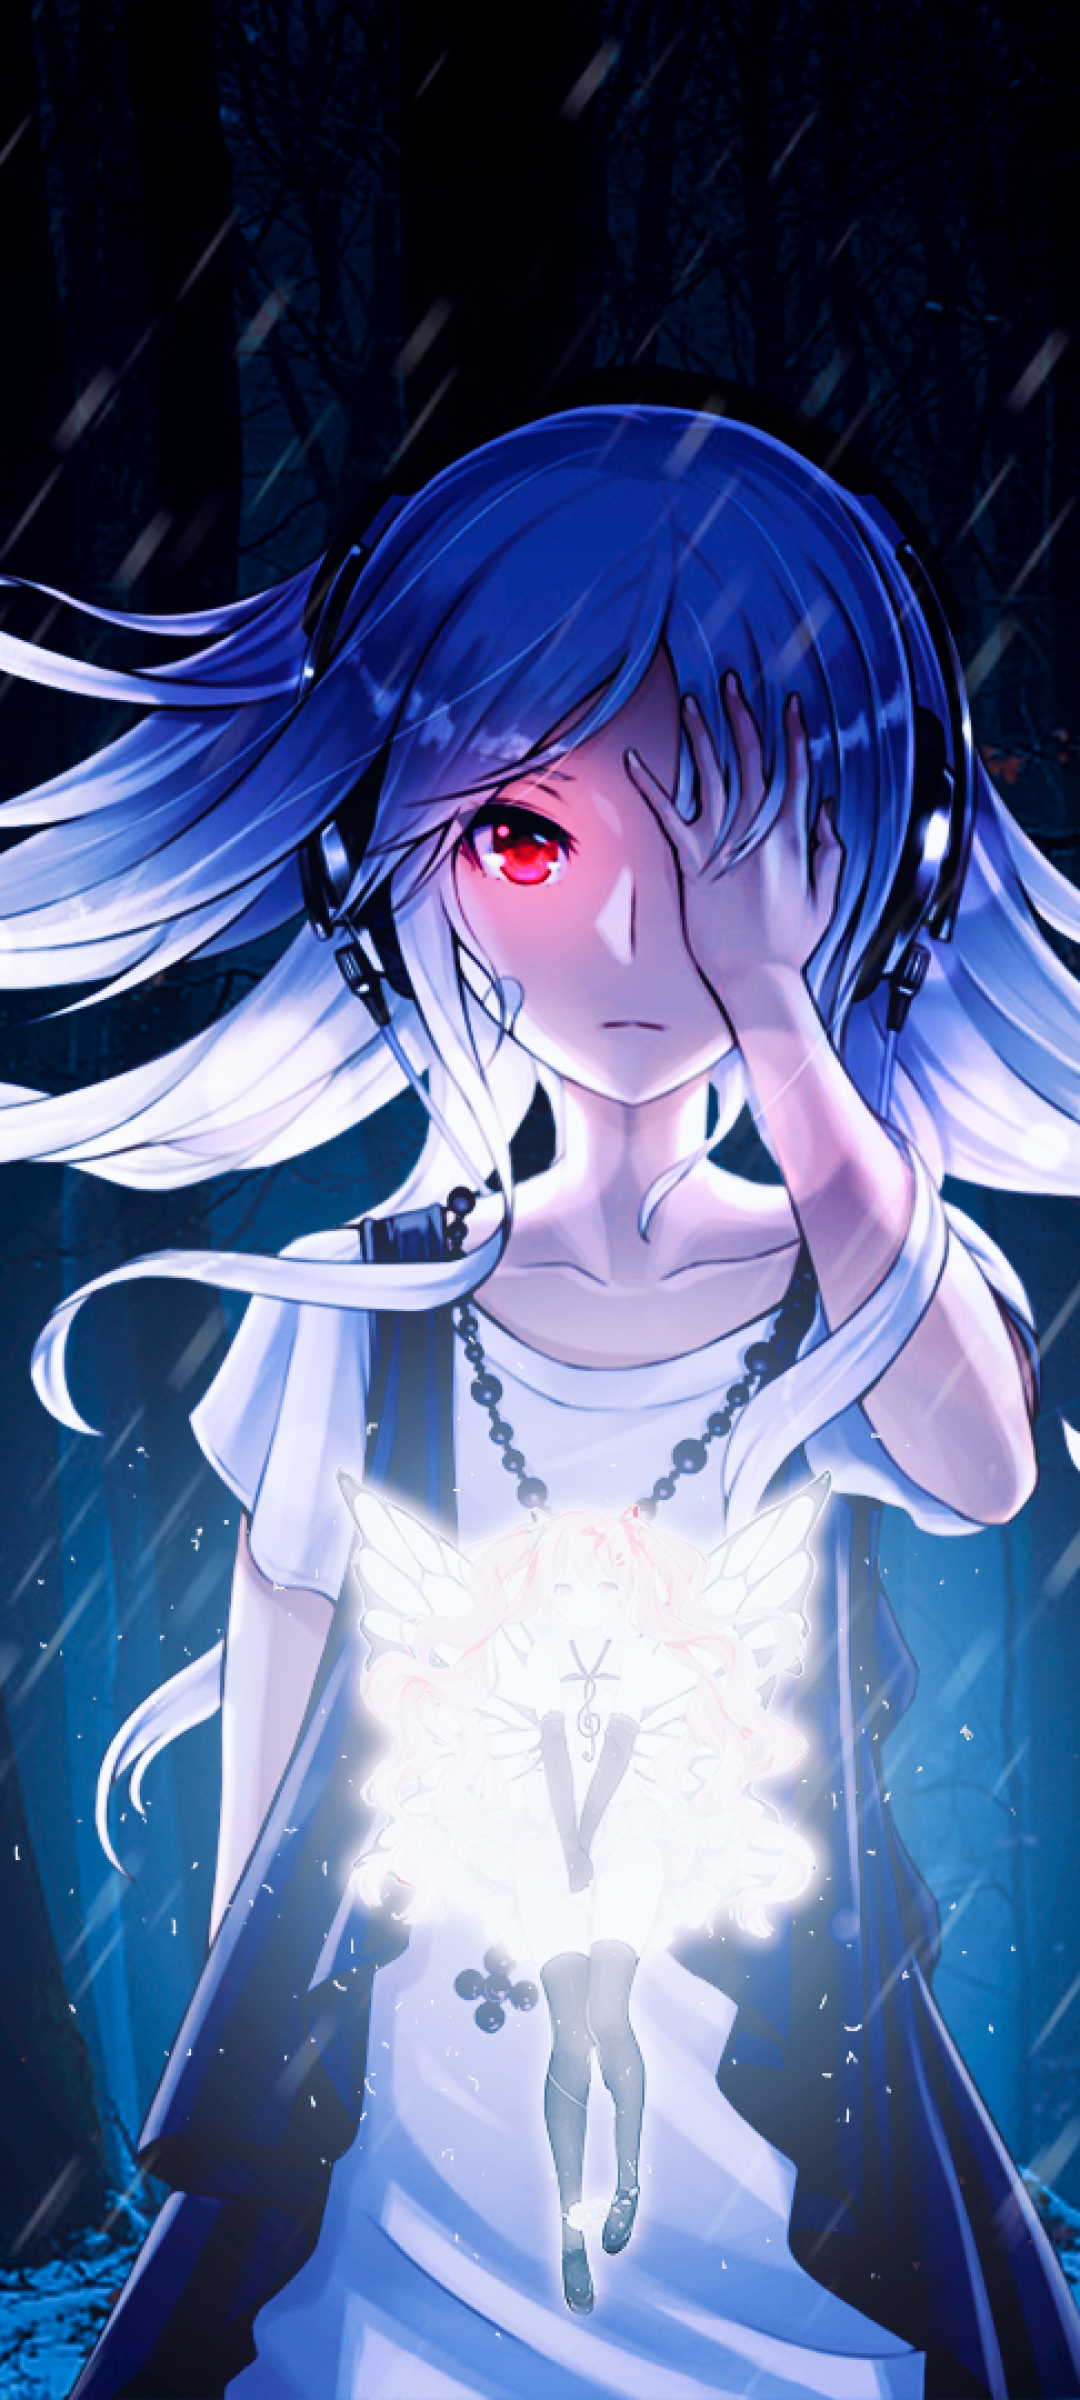 Download 1080x2400 Anime Girl, Blizzard, Red Eyes, Glowing, Fairy, Forest Wallpaper for Samsung Galaxy Note 20 & S20 FE, Xiaomi Mi 10T Pro, Poco F2 Pro